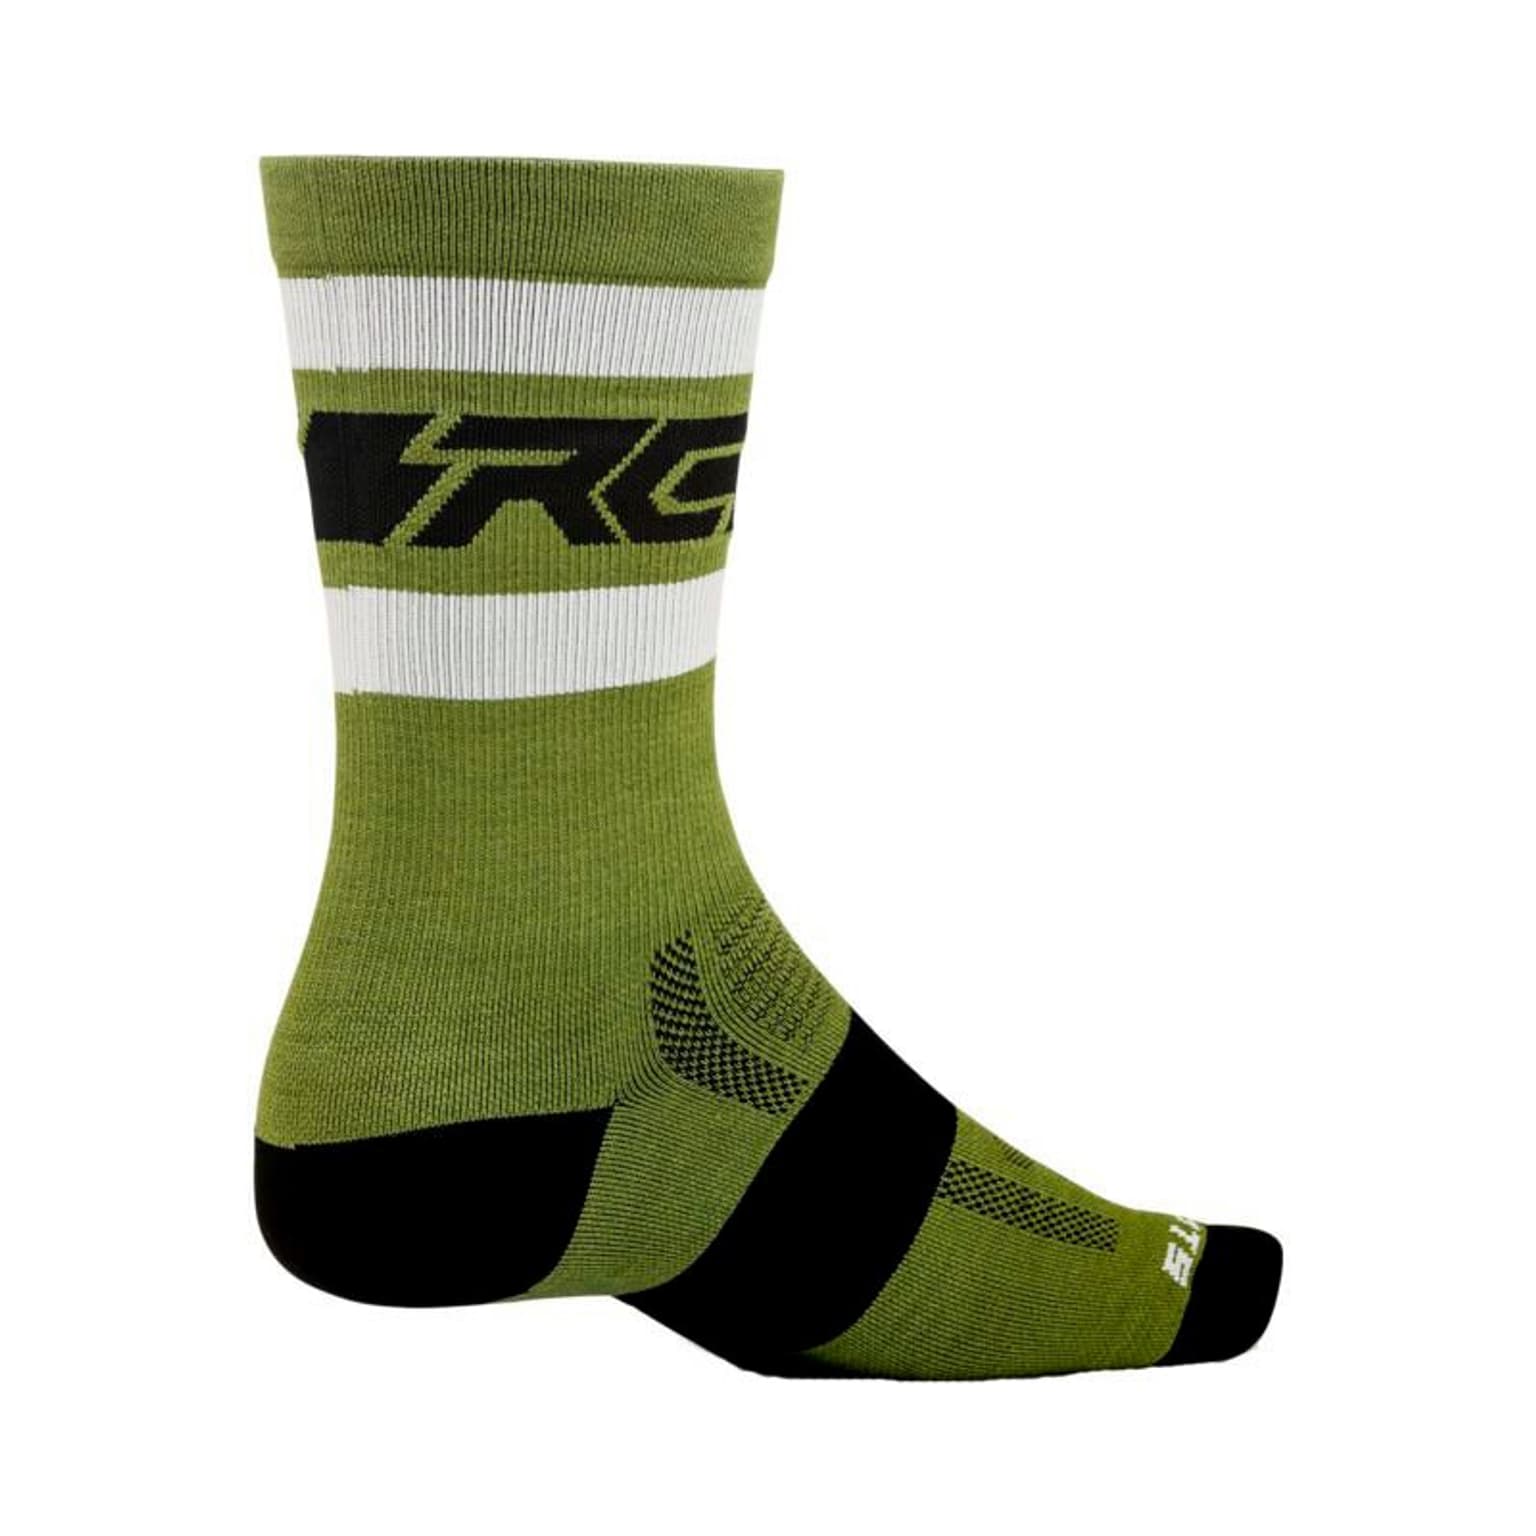 Ride Concepts Ride Concepts Woll Fifty-Fifty Velosocken vert-mousse 2